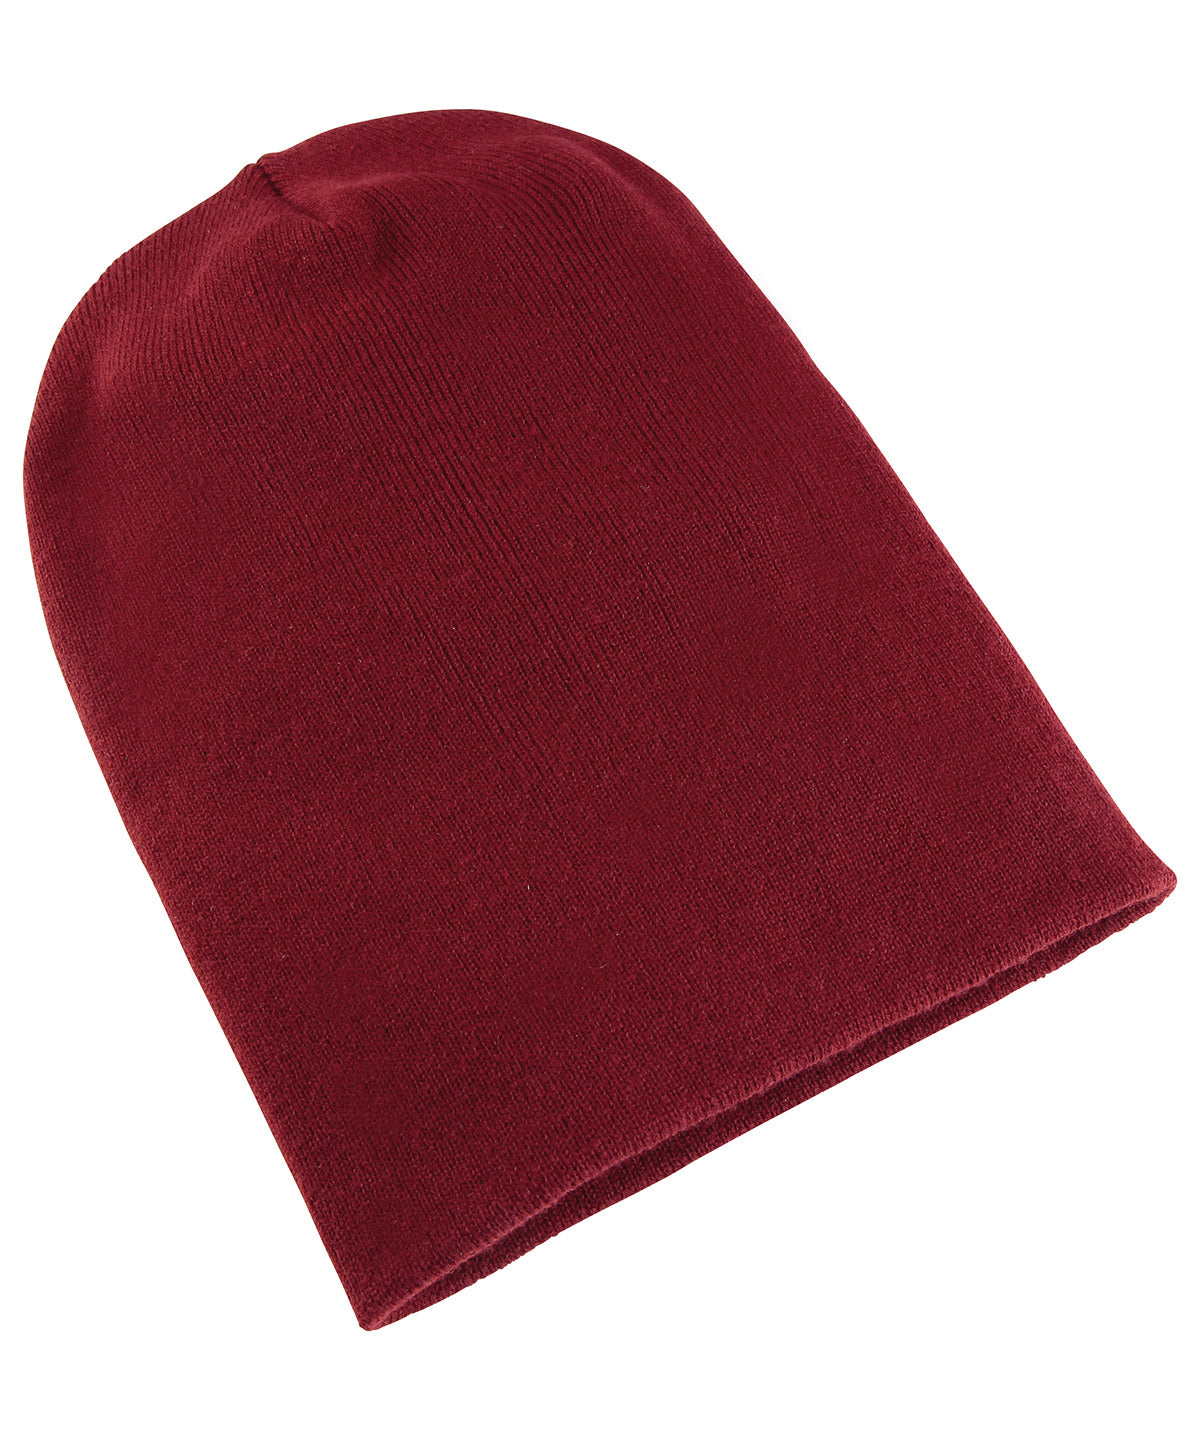 Maroon - Heavyweight long beanie (1501KC) Hats Flexfit by Yupoong Headwear, Must Haves, New Colours for 2023, Winter Essentials Schoolwear Centres